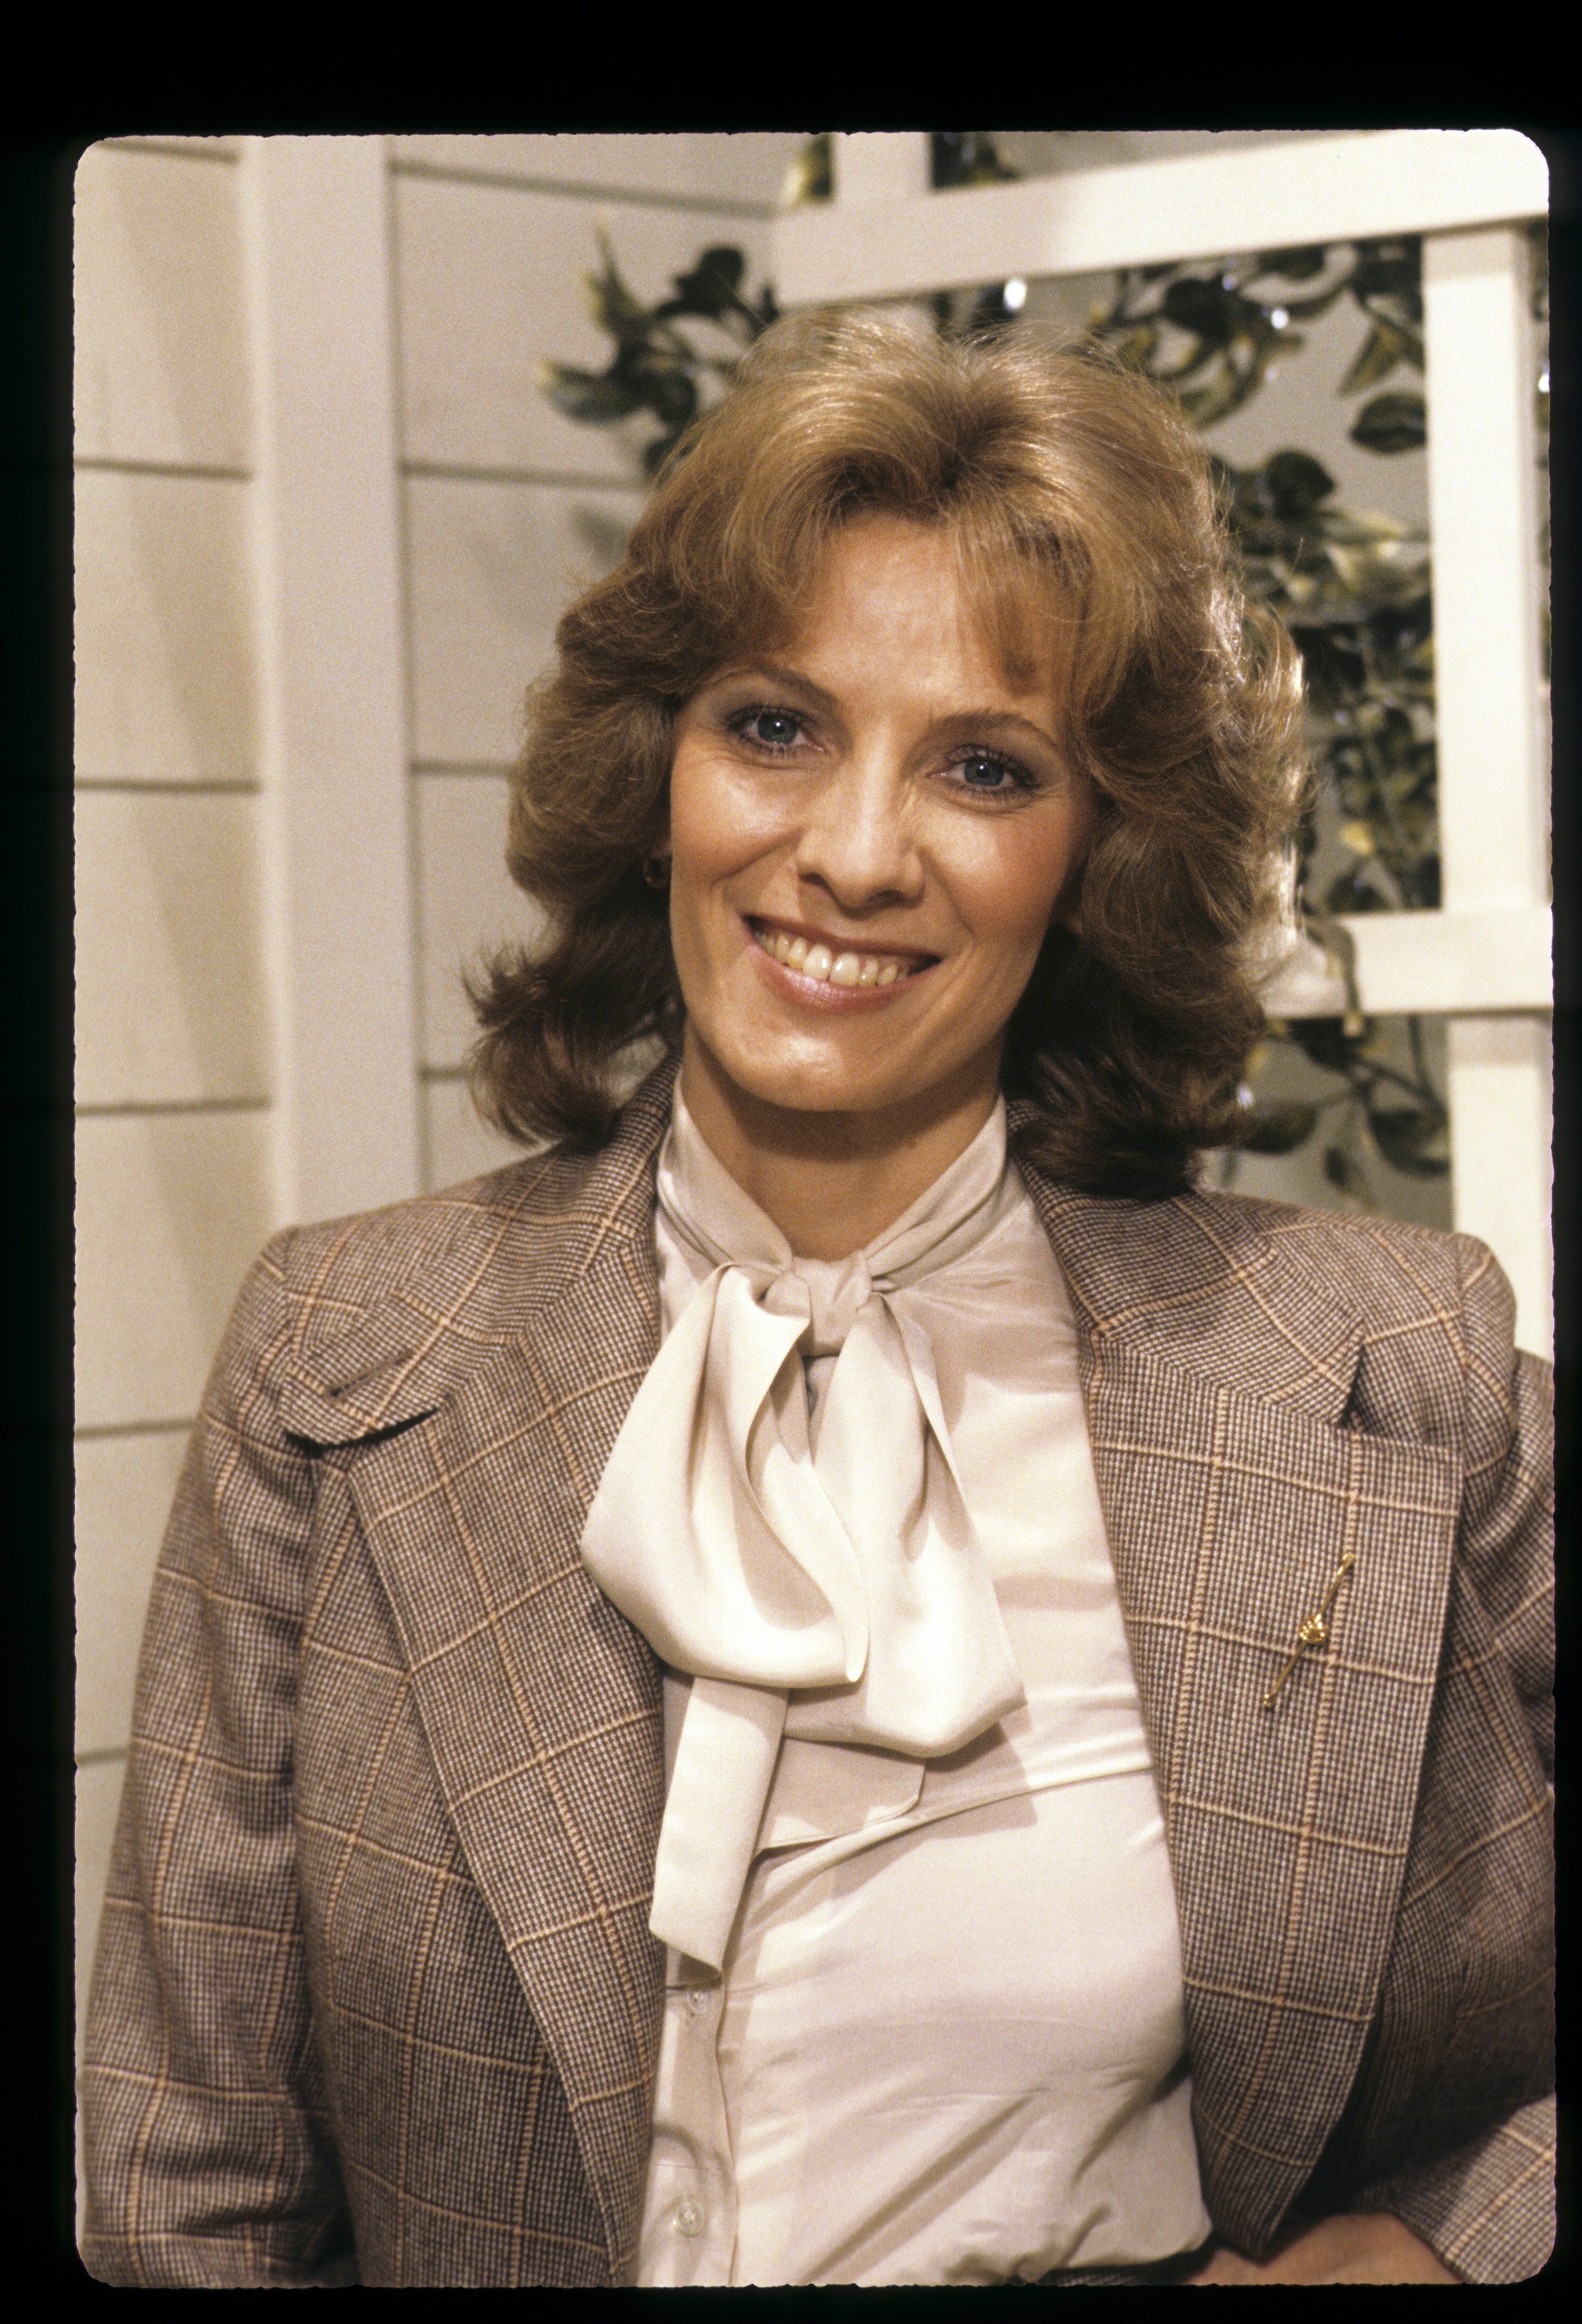 Betty Buckley as Abby Bradford in "Eight Is Enough." | Source: Getty Images